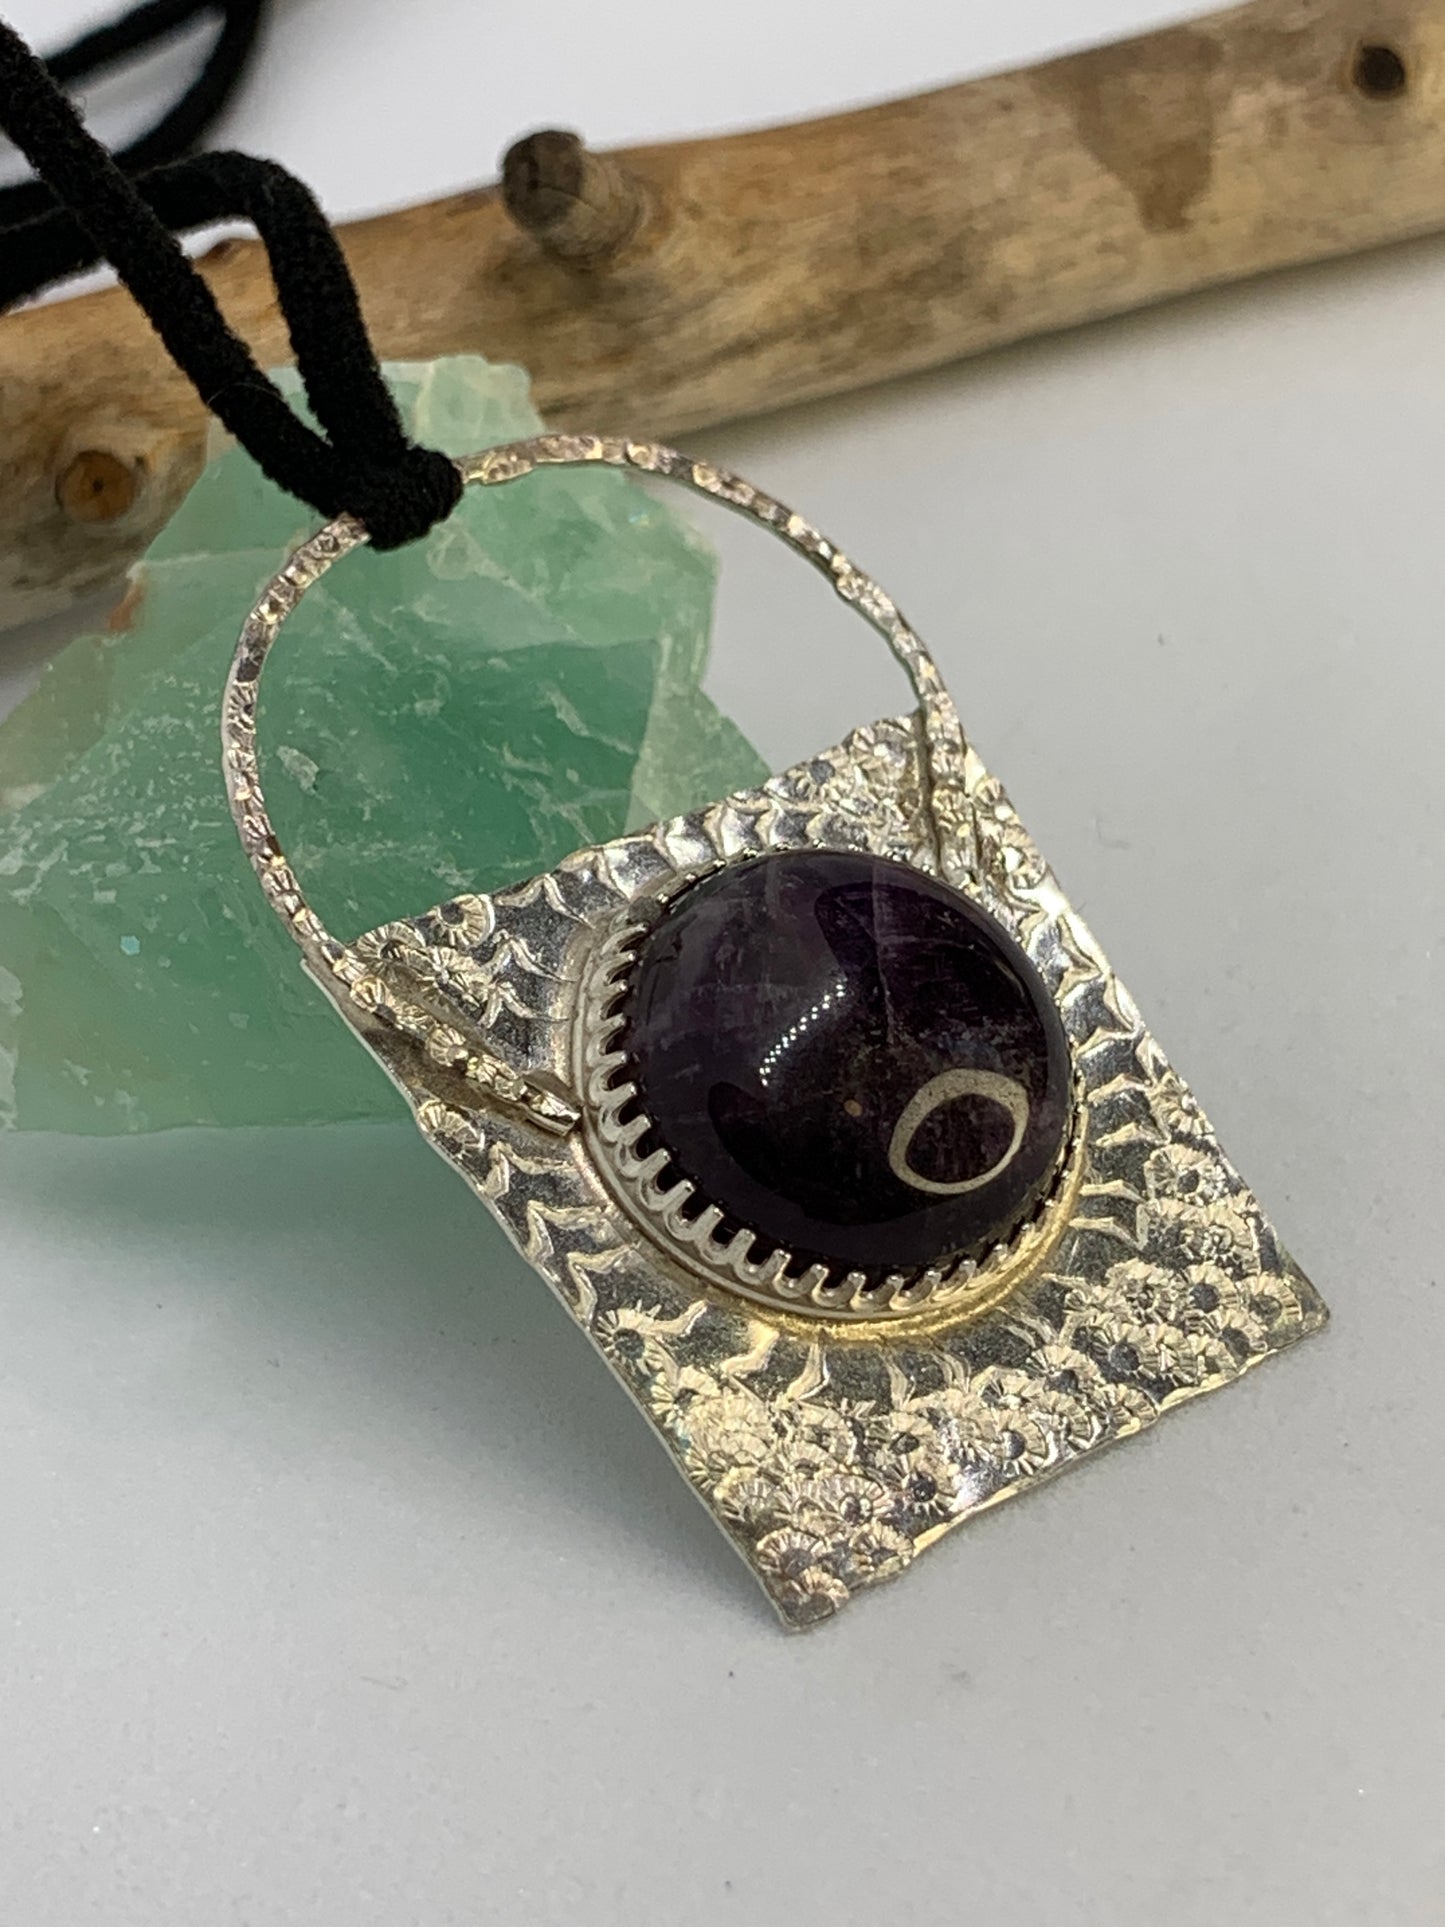 Large Geometric Abstract Sterling Silver Pendant with Amethyst Stone. Half circle design. Each piece is one of a kind and no two are alike. Handmade. 